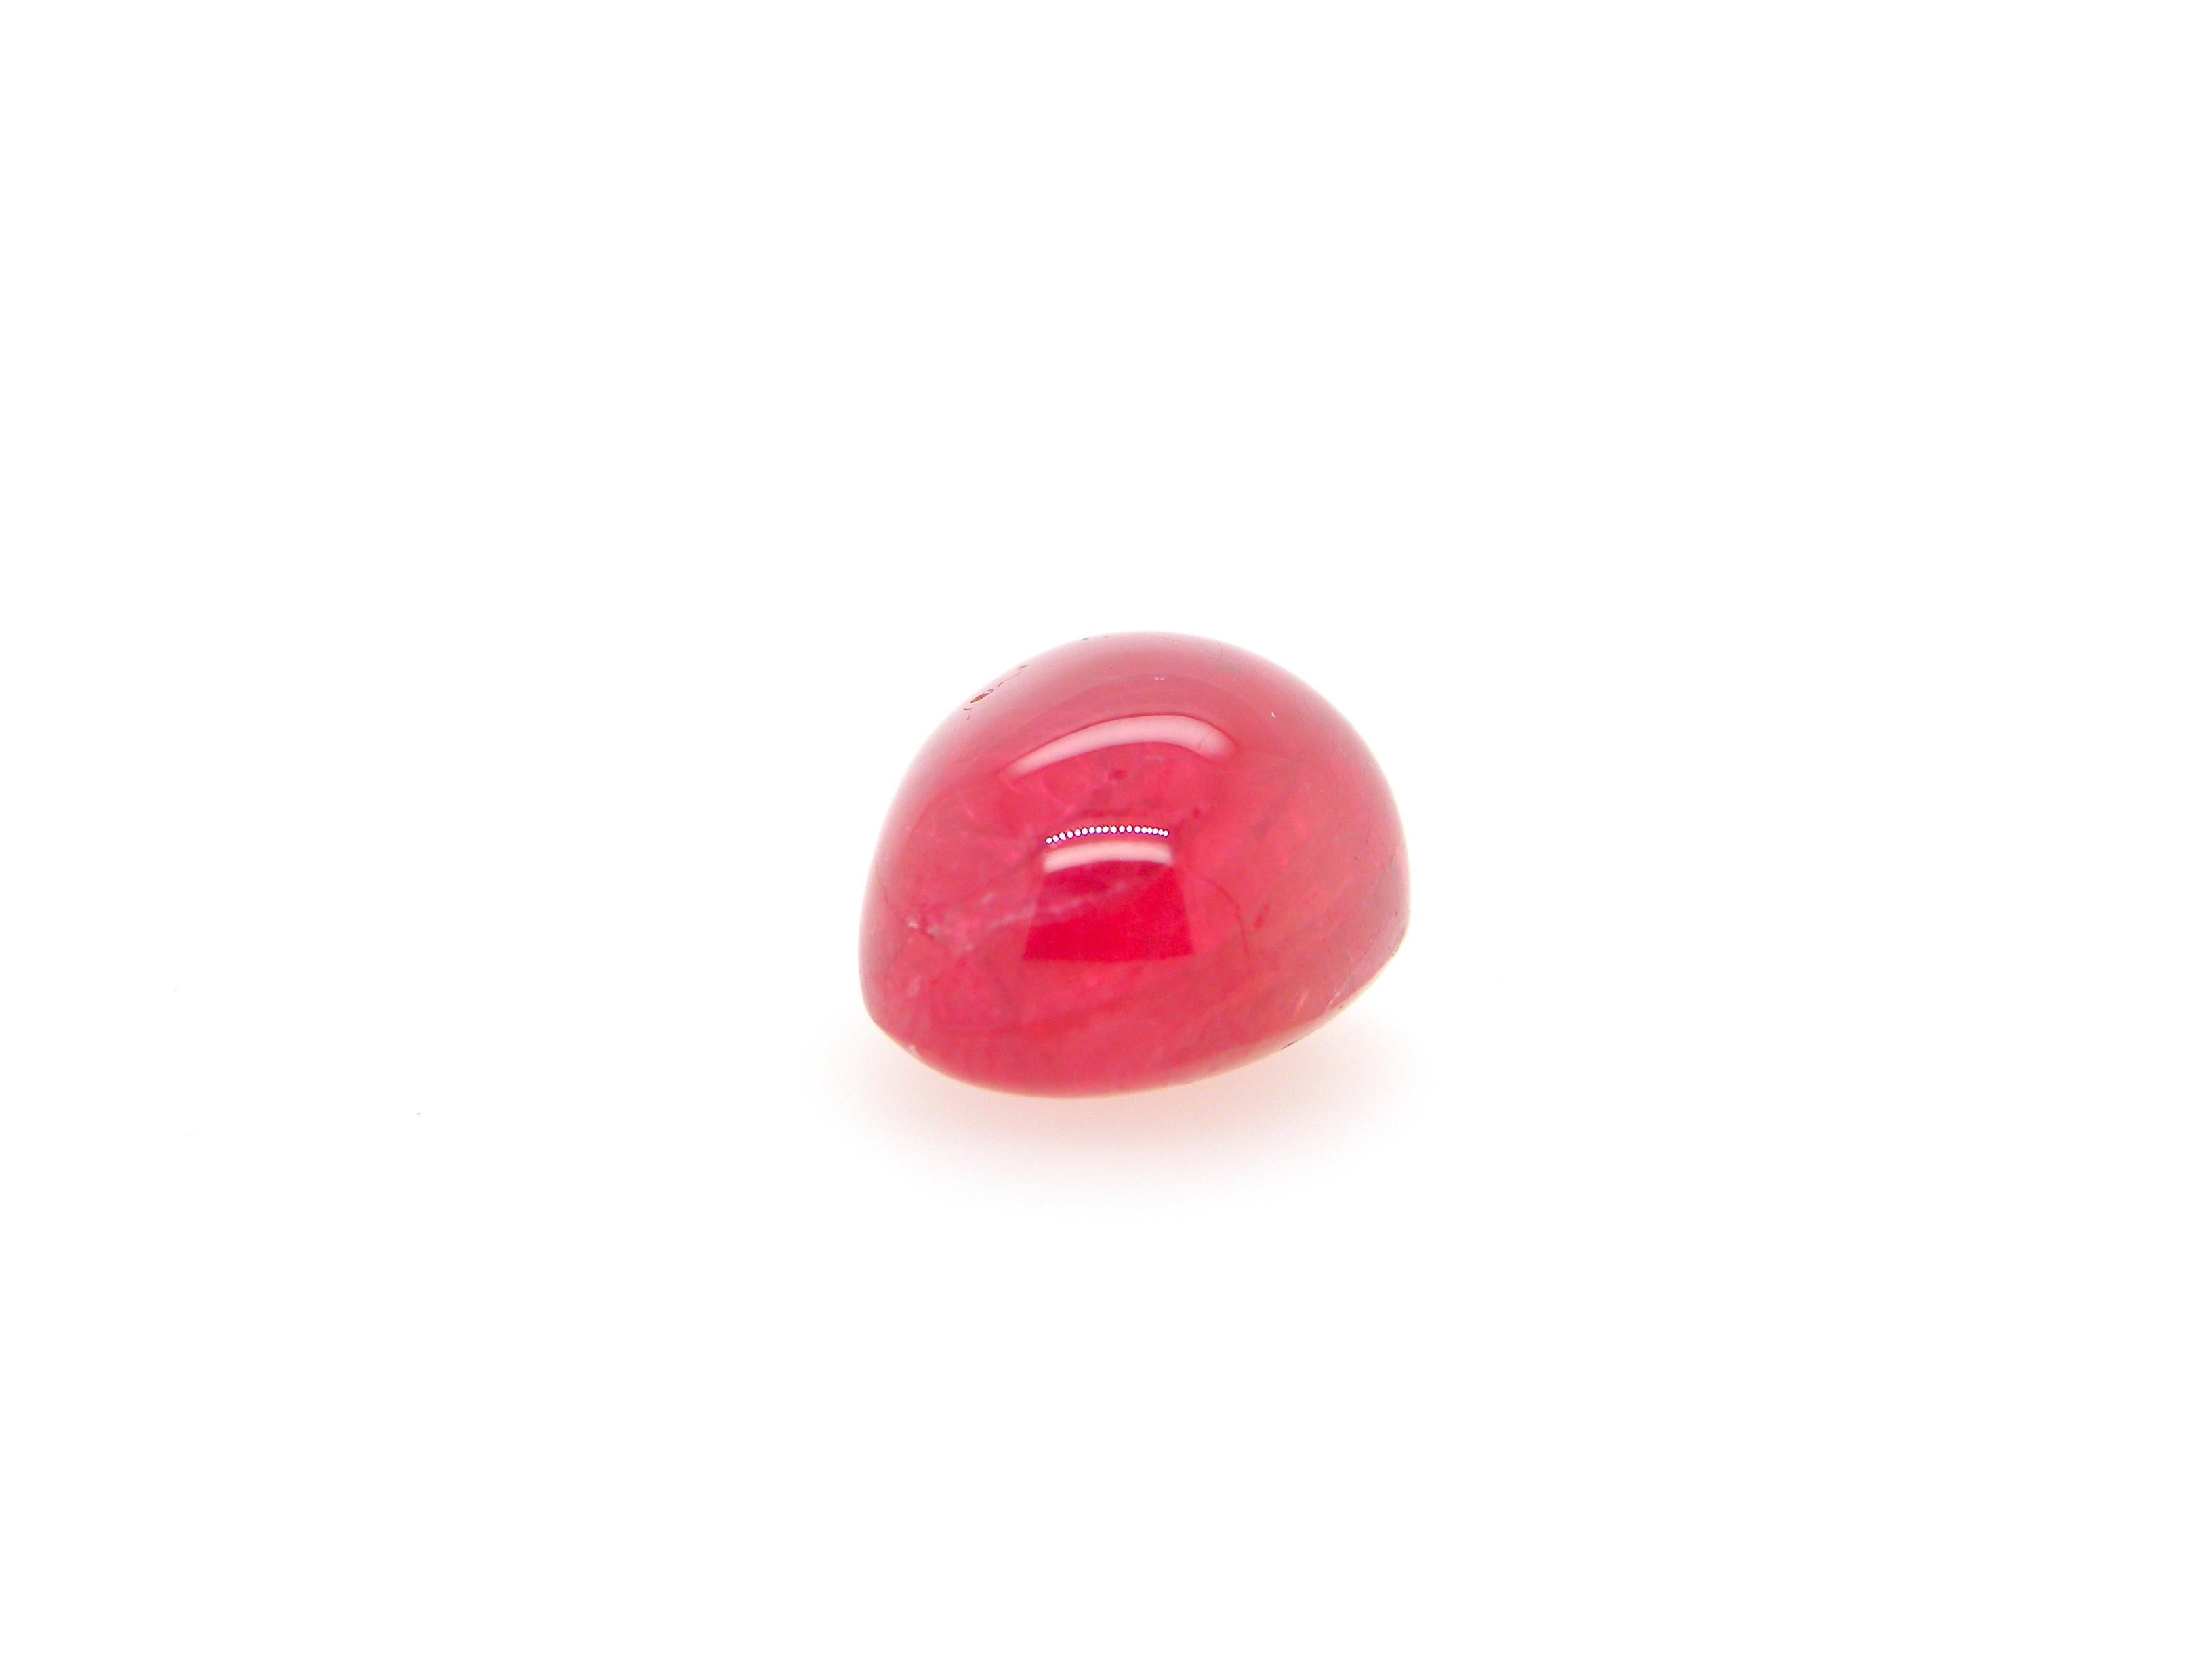 12 Carat Burma No Heat Red Spinel Cabochon For Sale 2